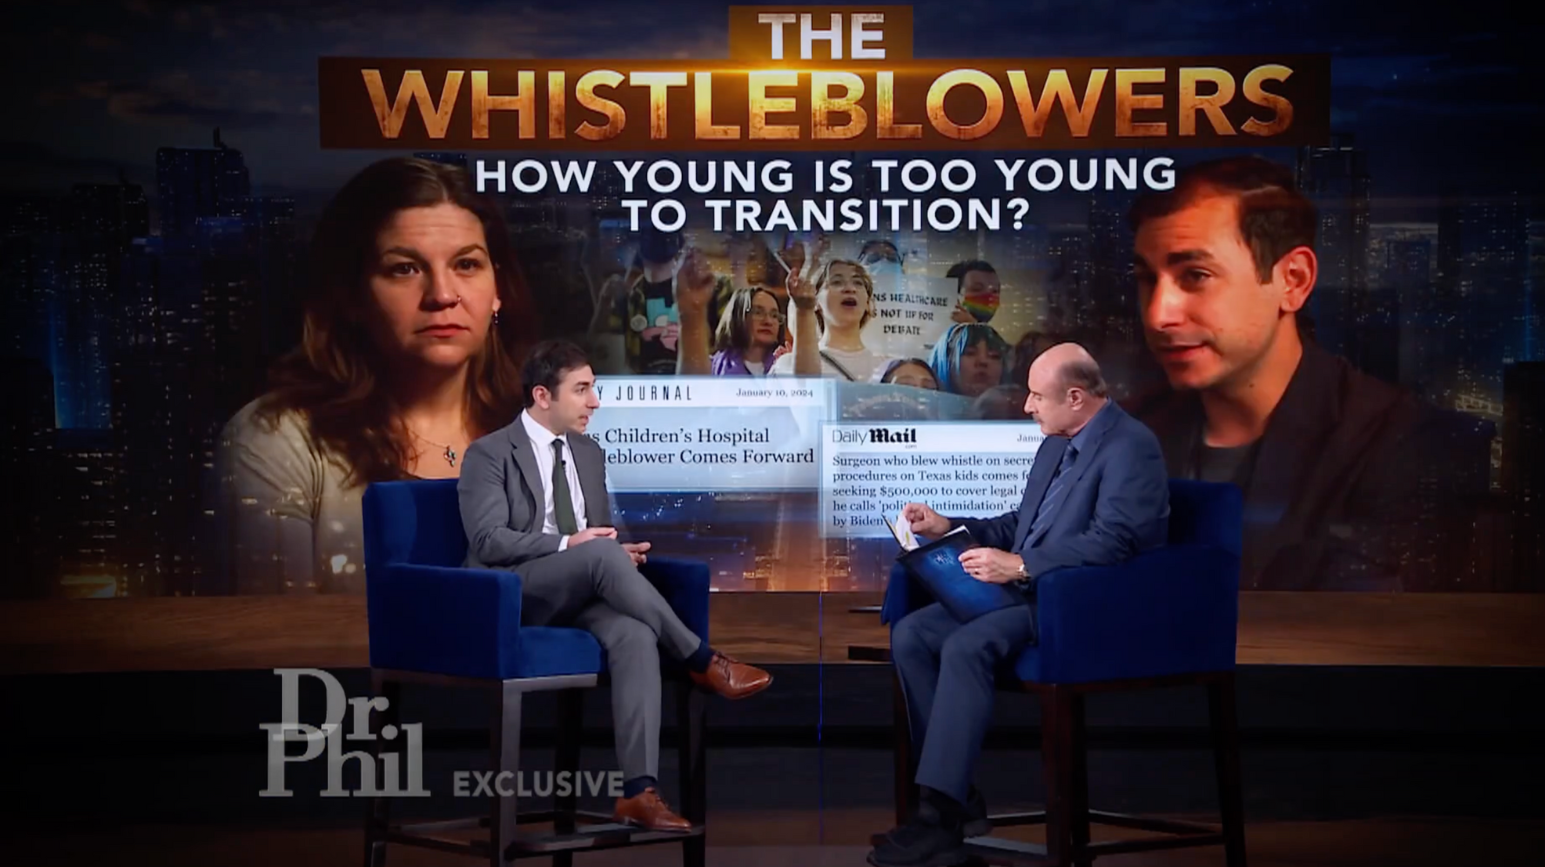 The Whistleblowers: How Young is Too Young to Transition?